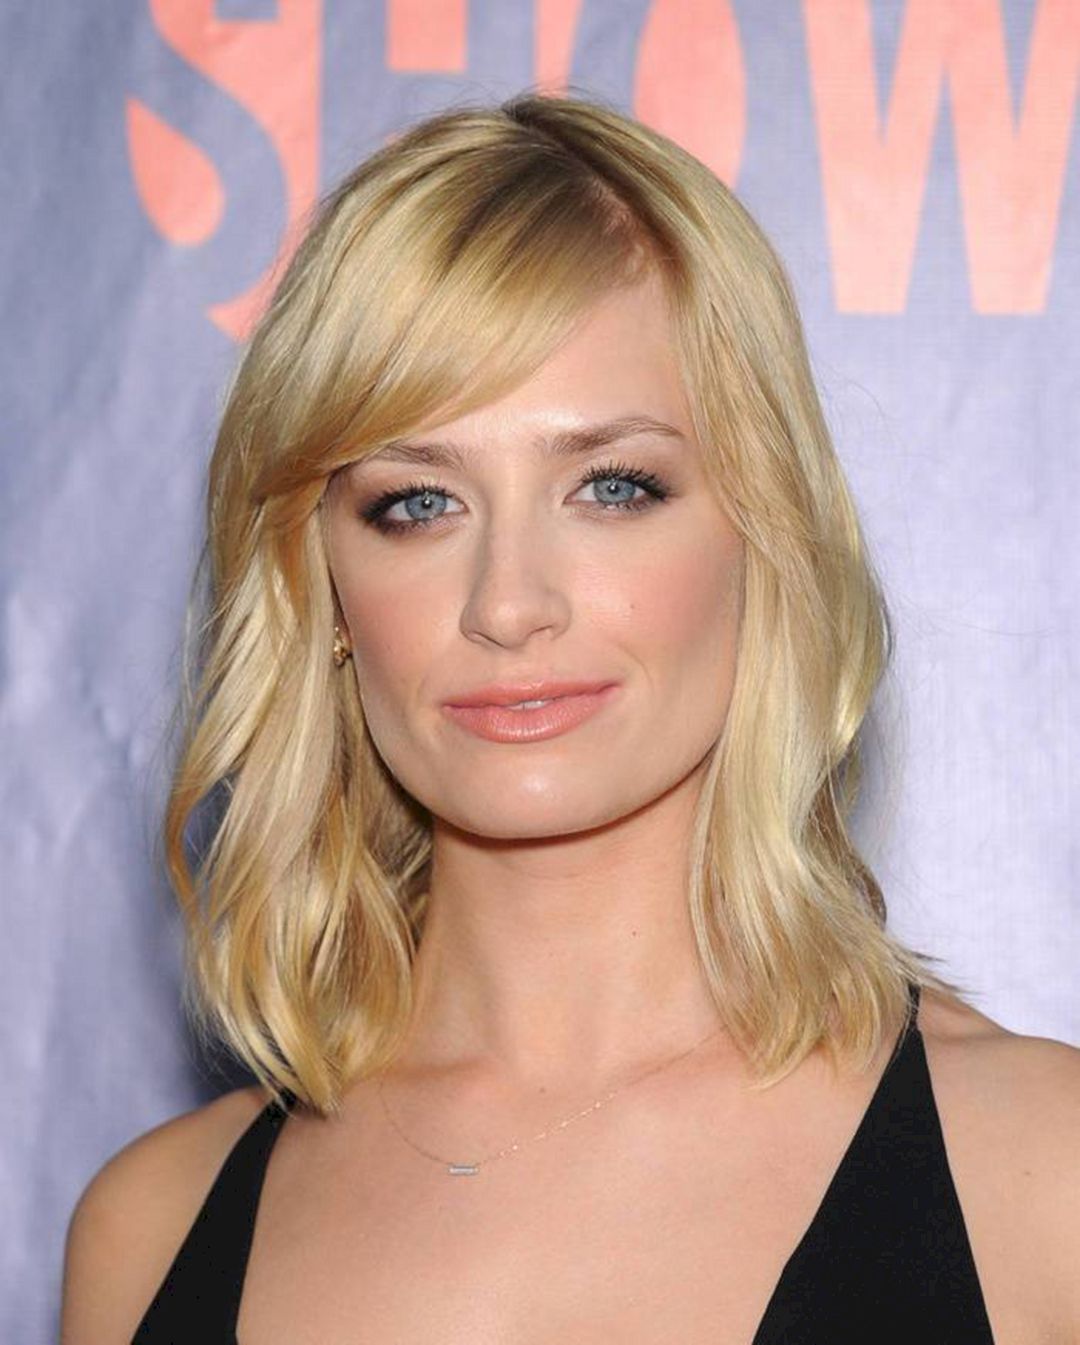 Beth behrs short hair from foliver